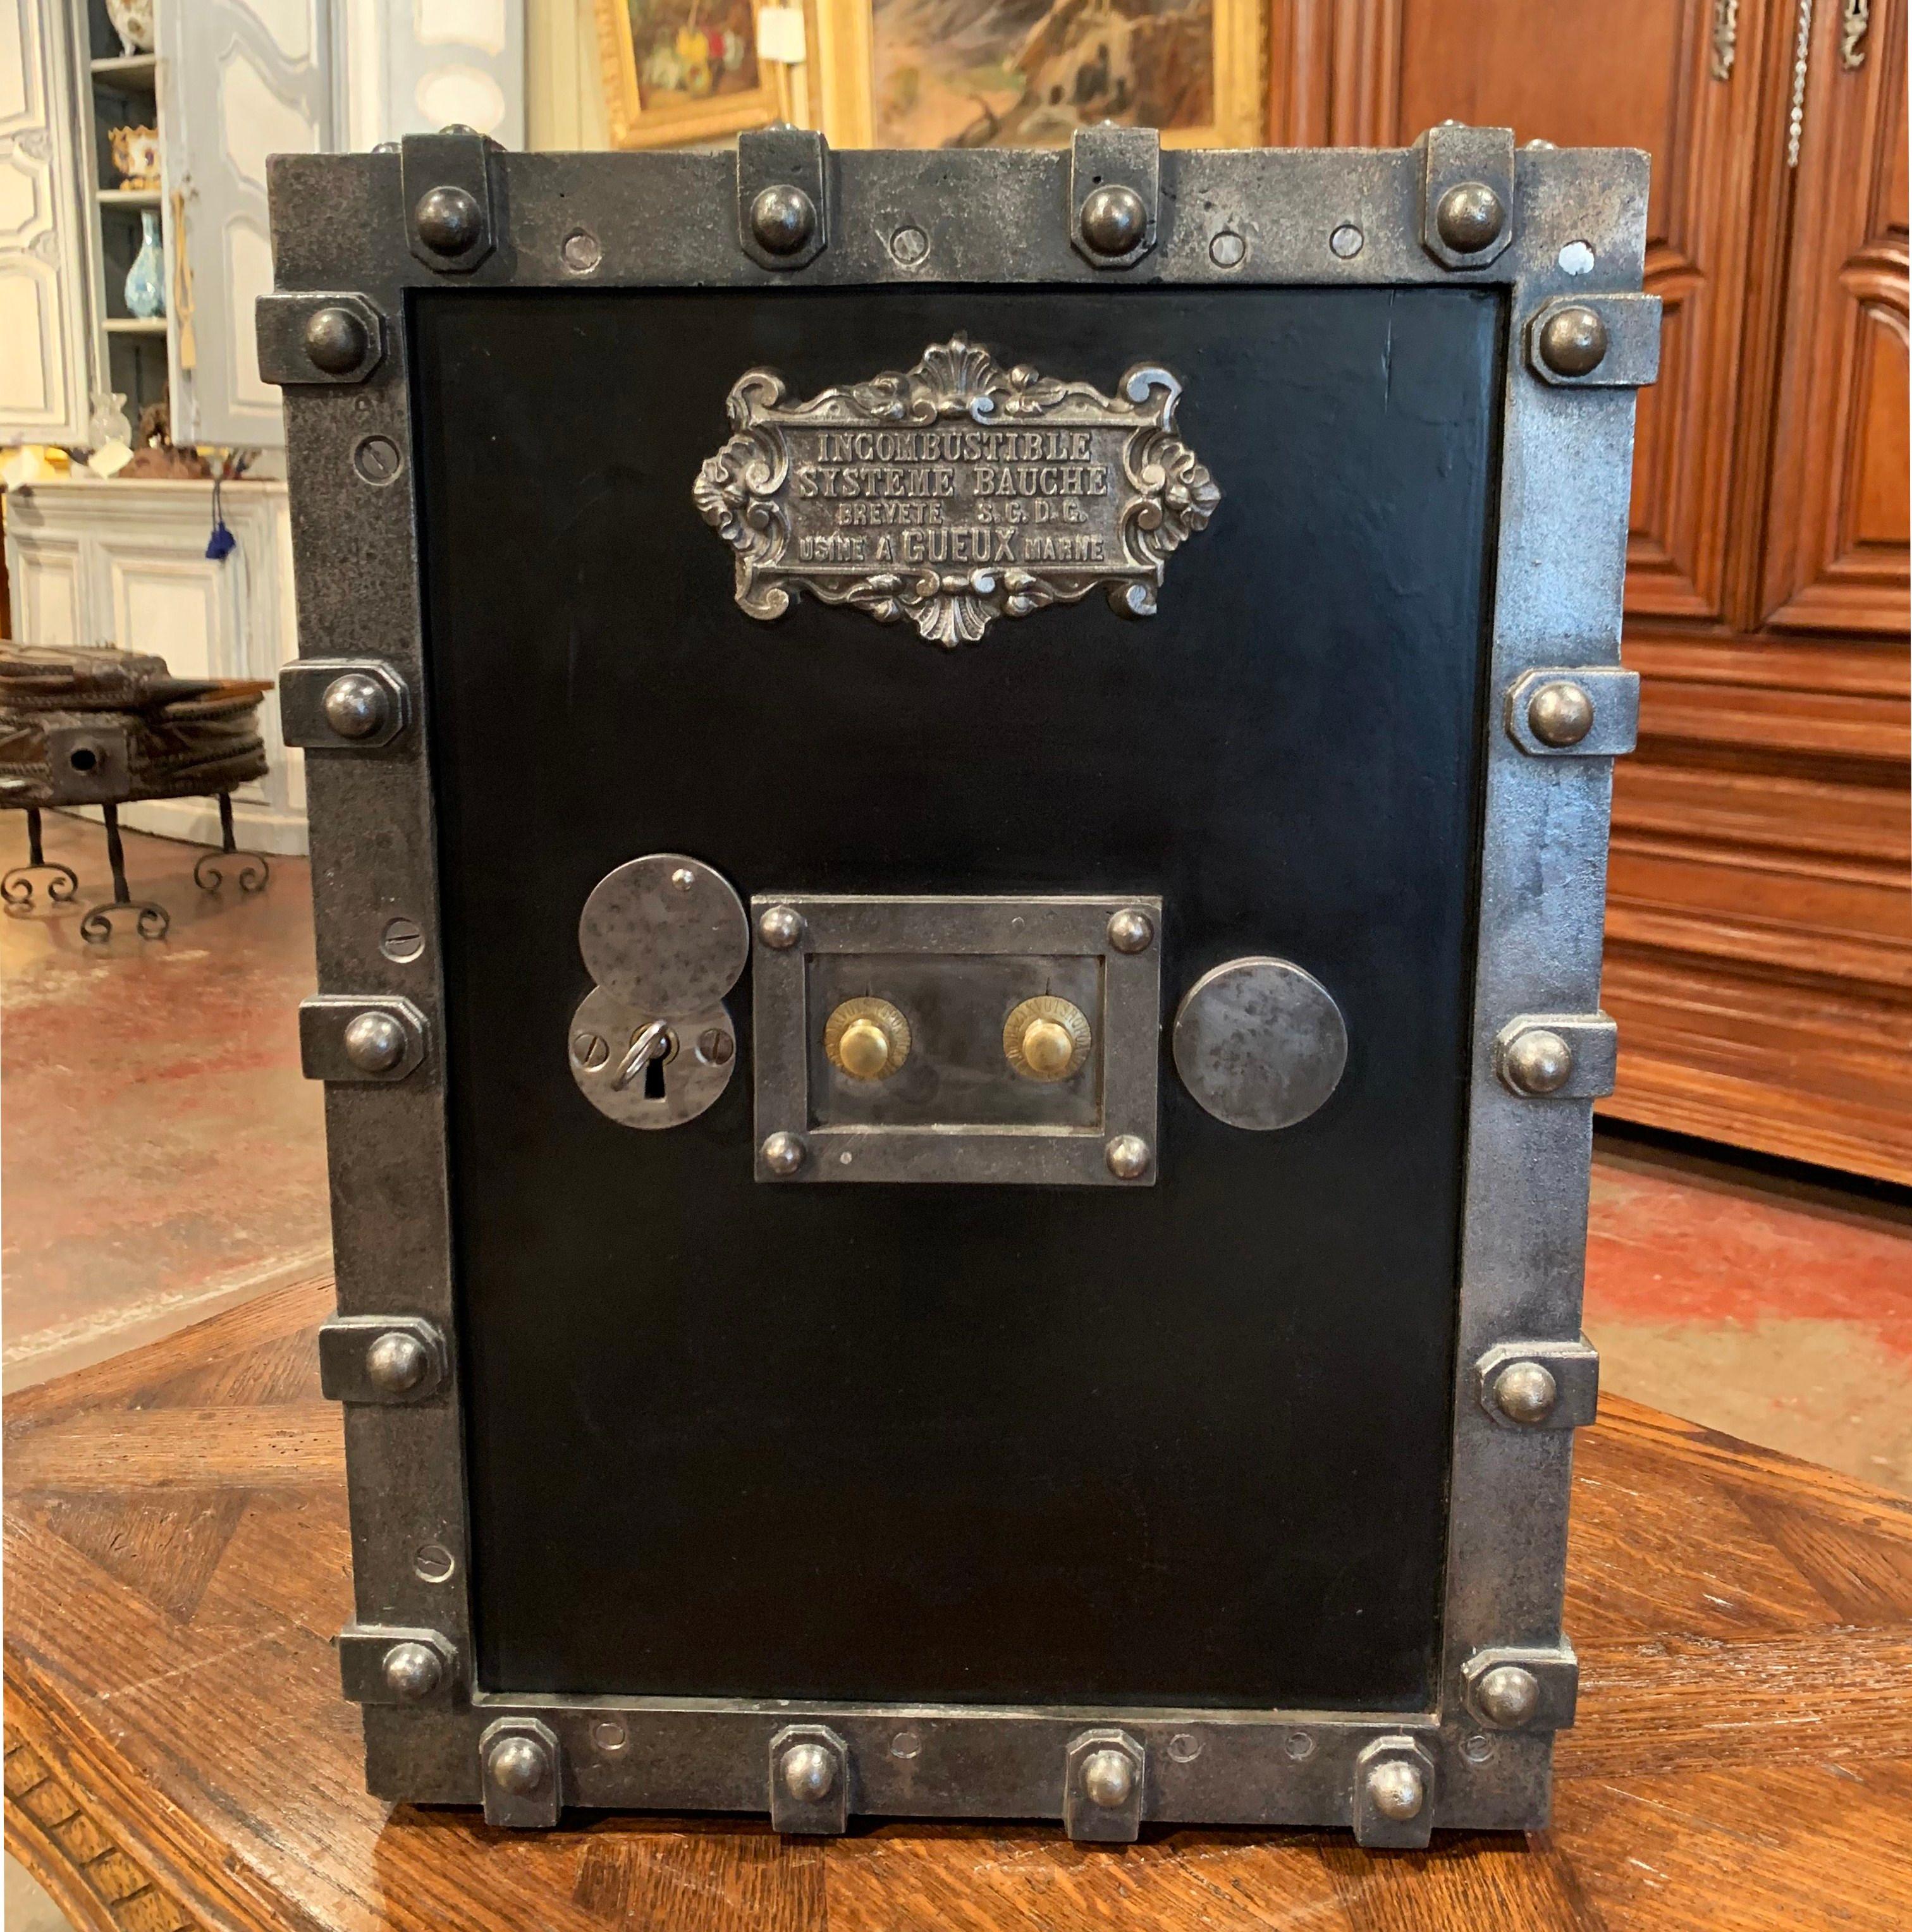 Keep your jewelry and important documents locked up in this elegant, antique safe from the Champagne-Ardenne region of France. Crafted circa 1880 in cast iron with gun barrel finish and finished on all sides, this travel safe is decorated with